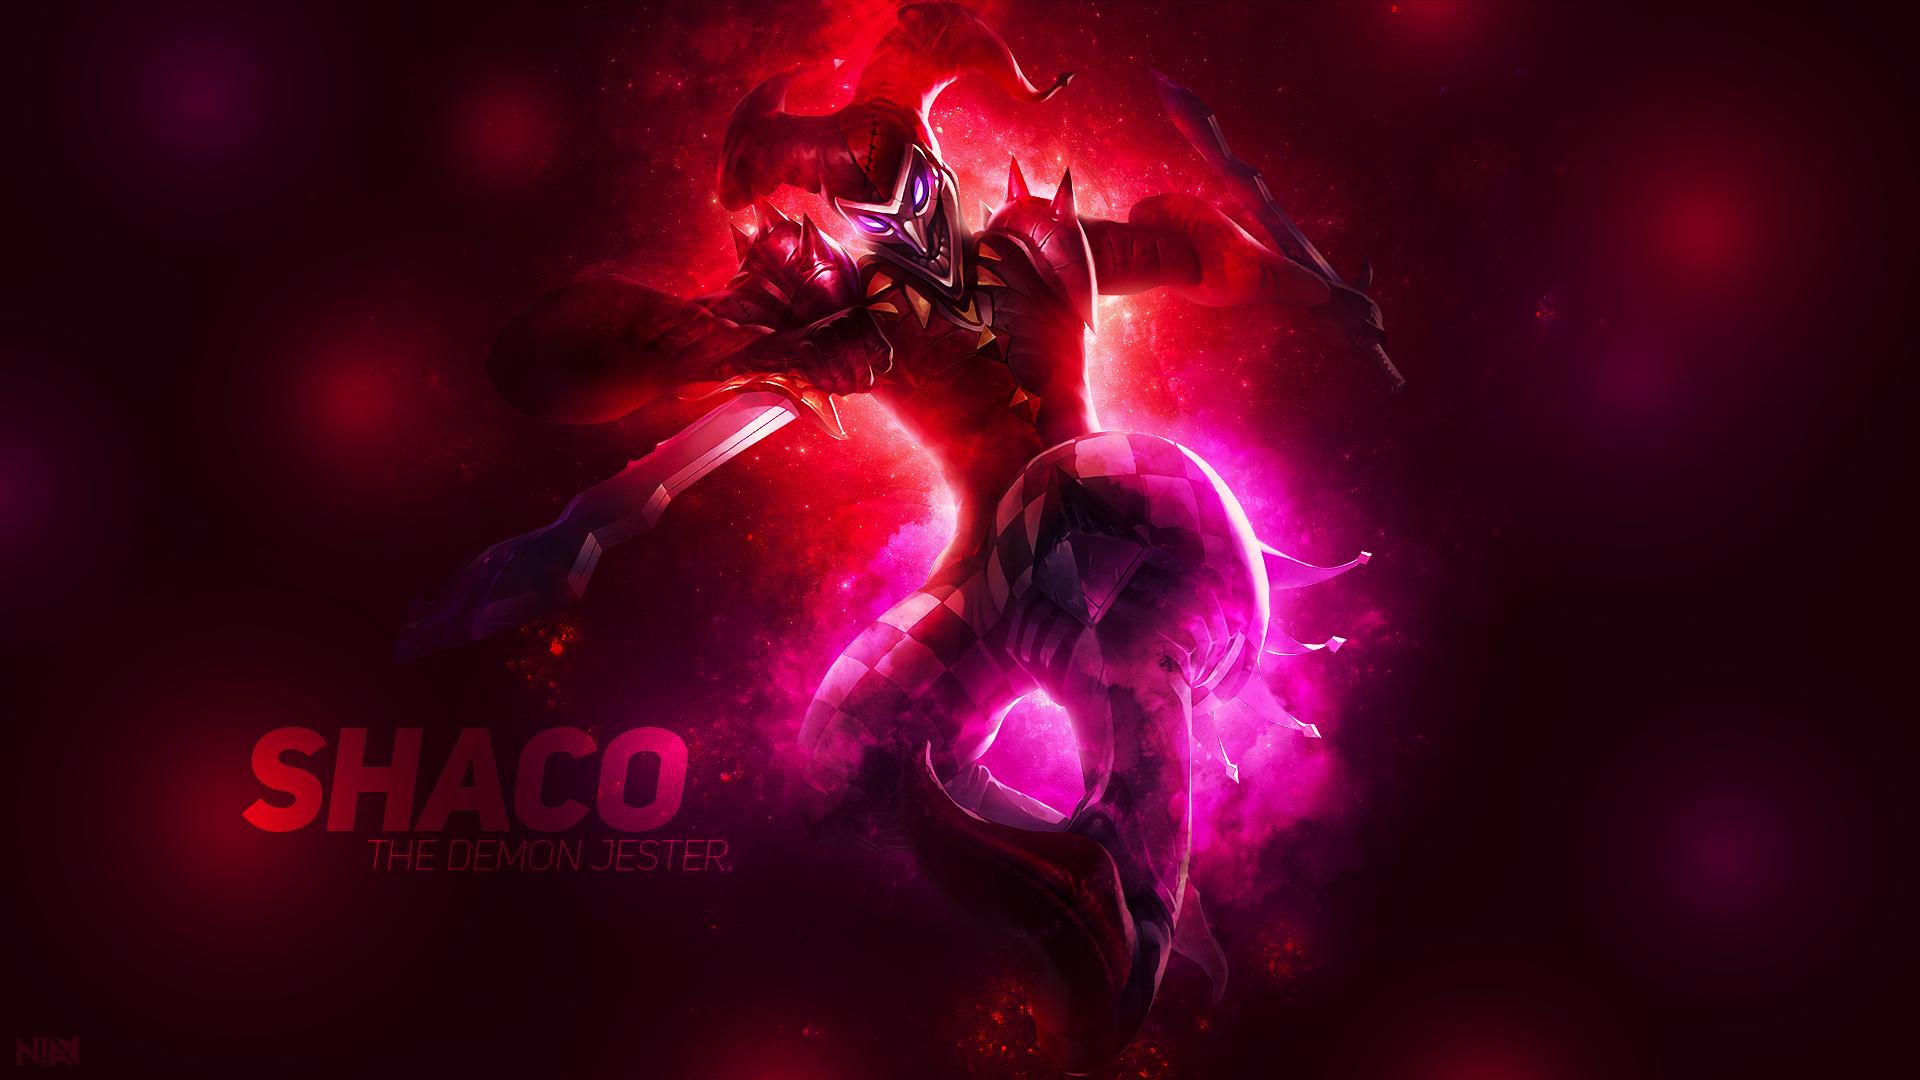 1920 x 1080 · png - Shaco The Demon Jester - Wallpaper 1920x1080 by AliceeMad on DeviantArt